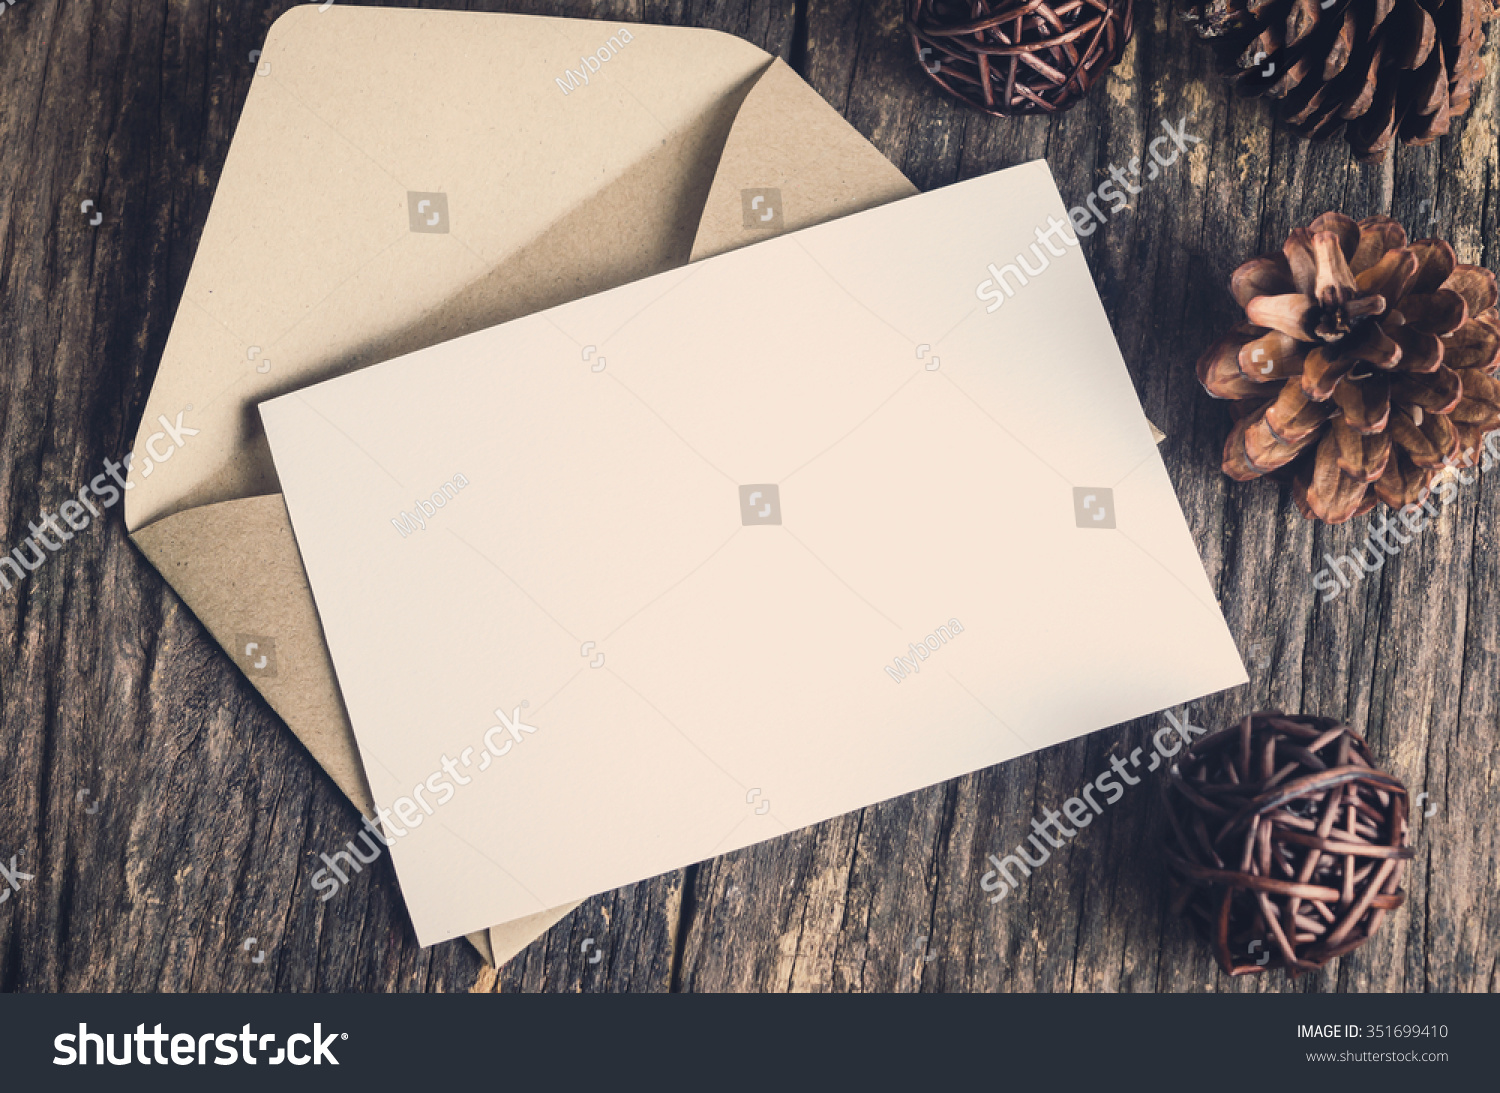 Blank white paper card with brown envelop and pine cones on old wooden table with vintage and vignette tone #351699410